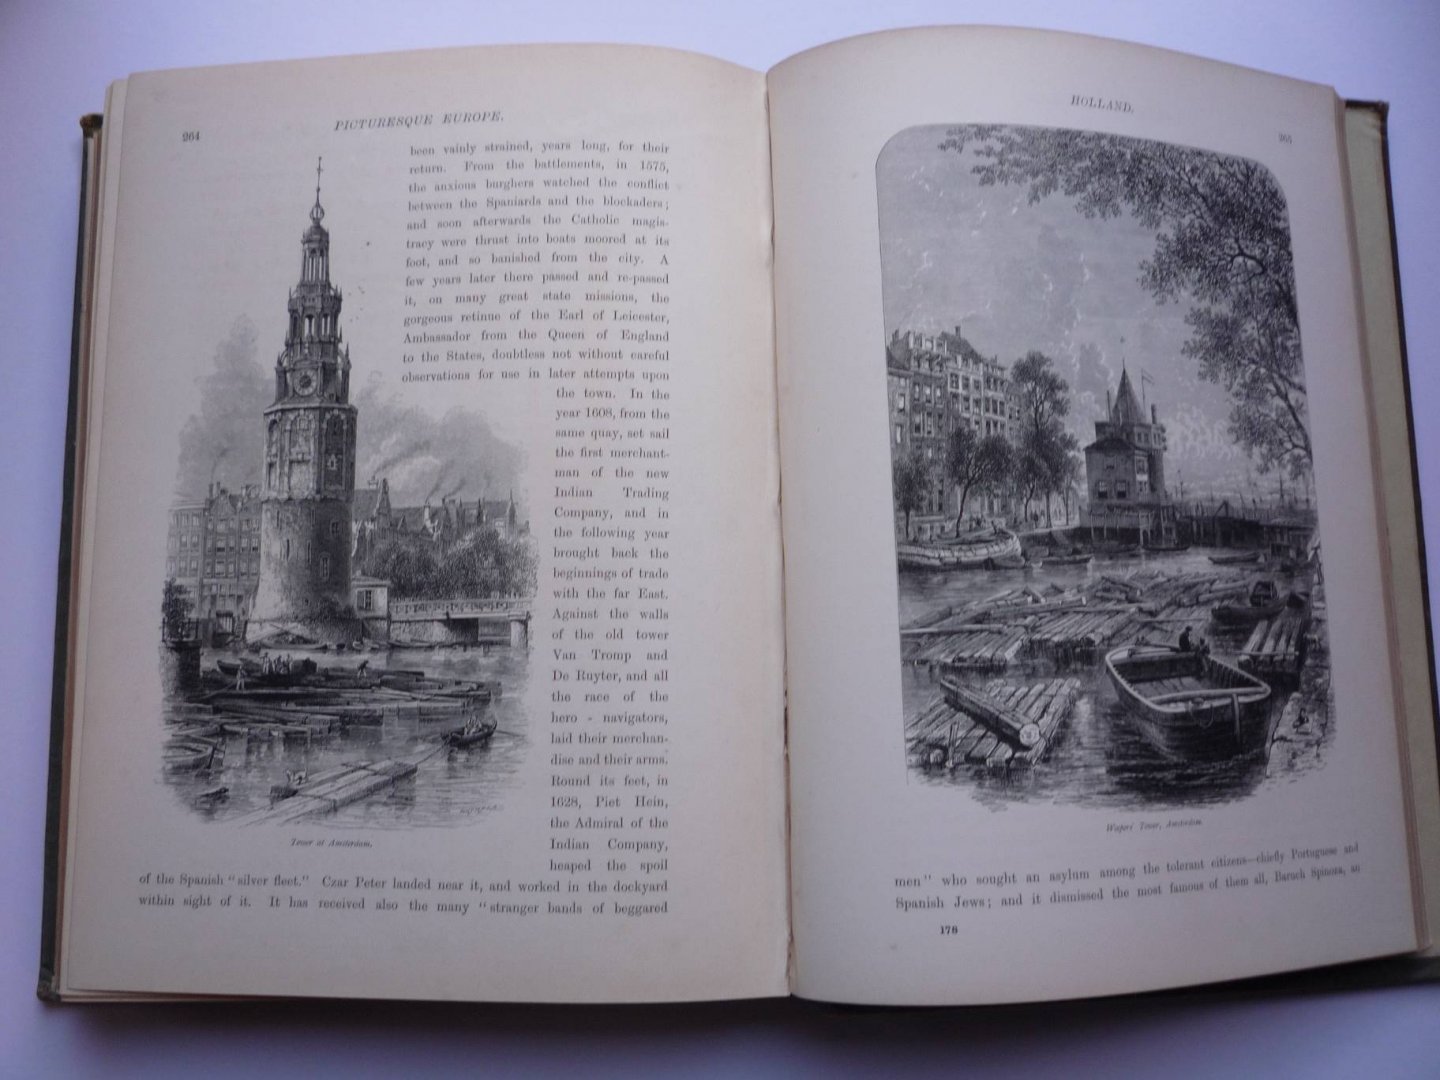 Bonney, T G. e.o. - Picturesque Europe. With Illustrations on Steel and Wood by the most eminent Artists (4 Vols. of 5)